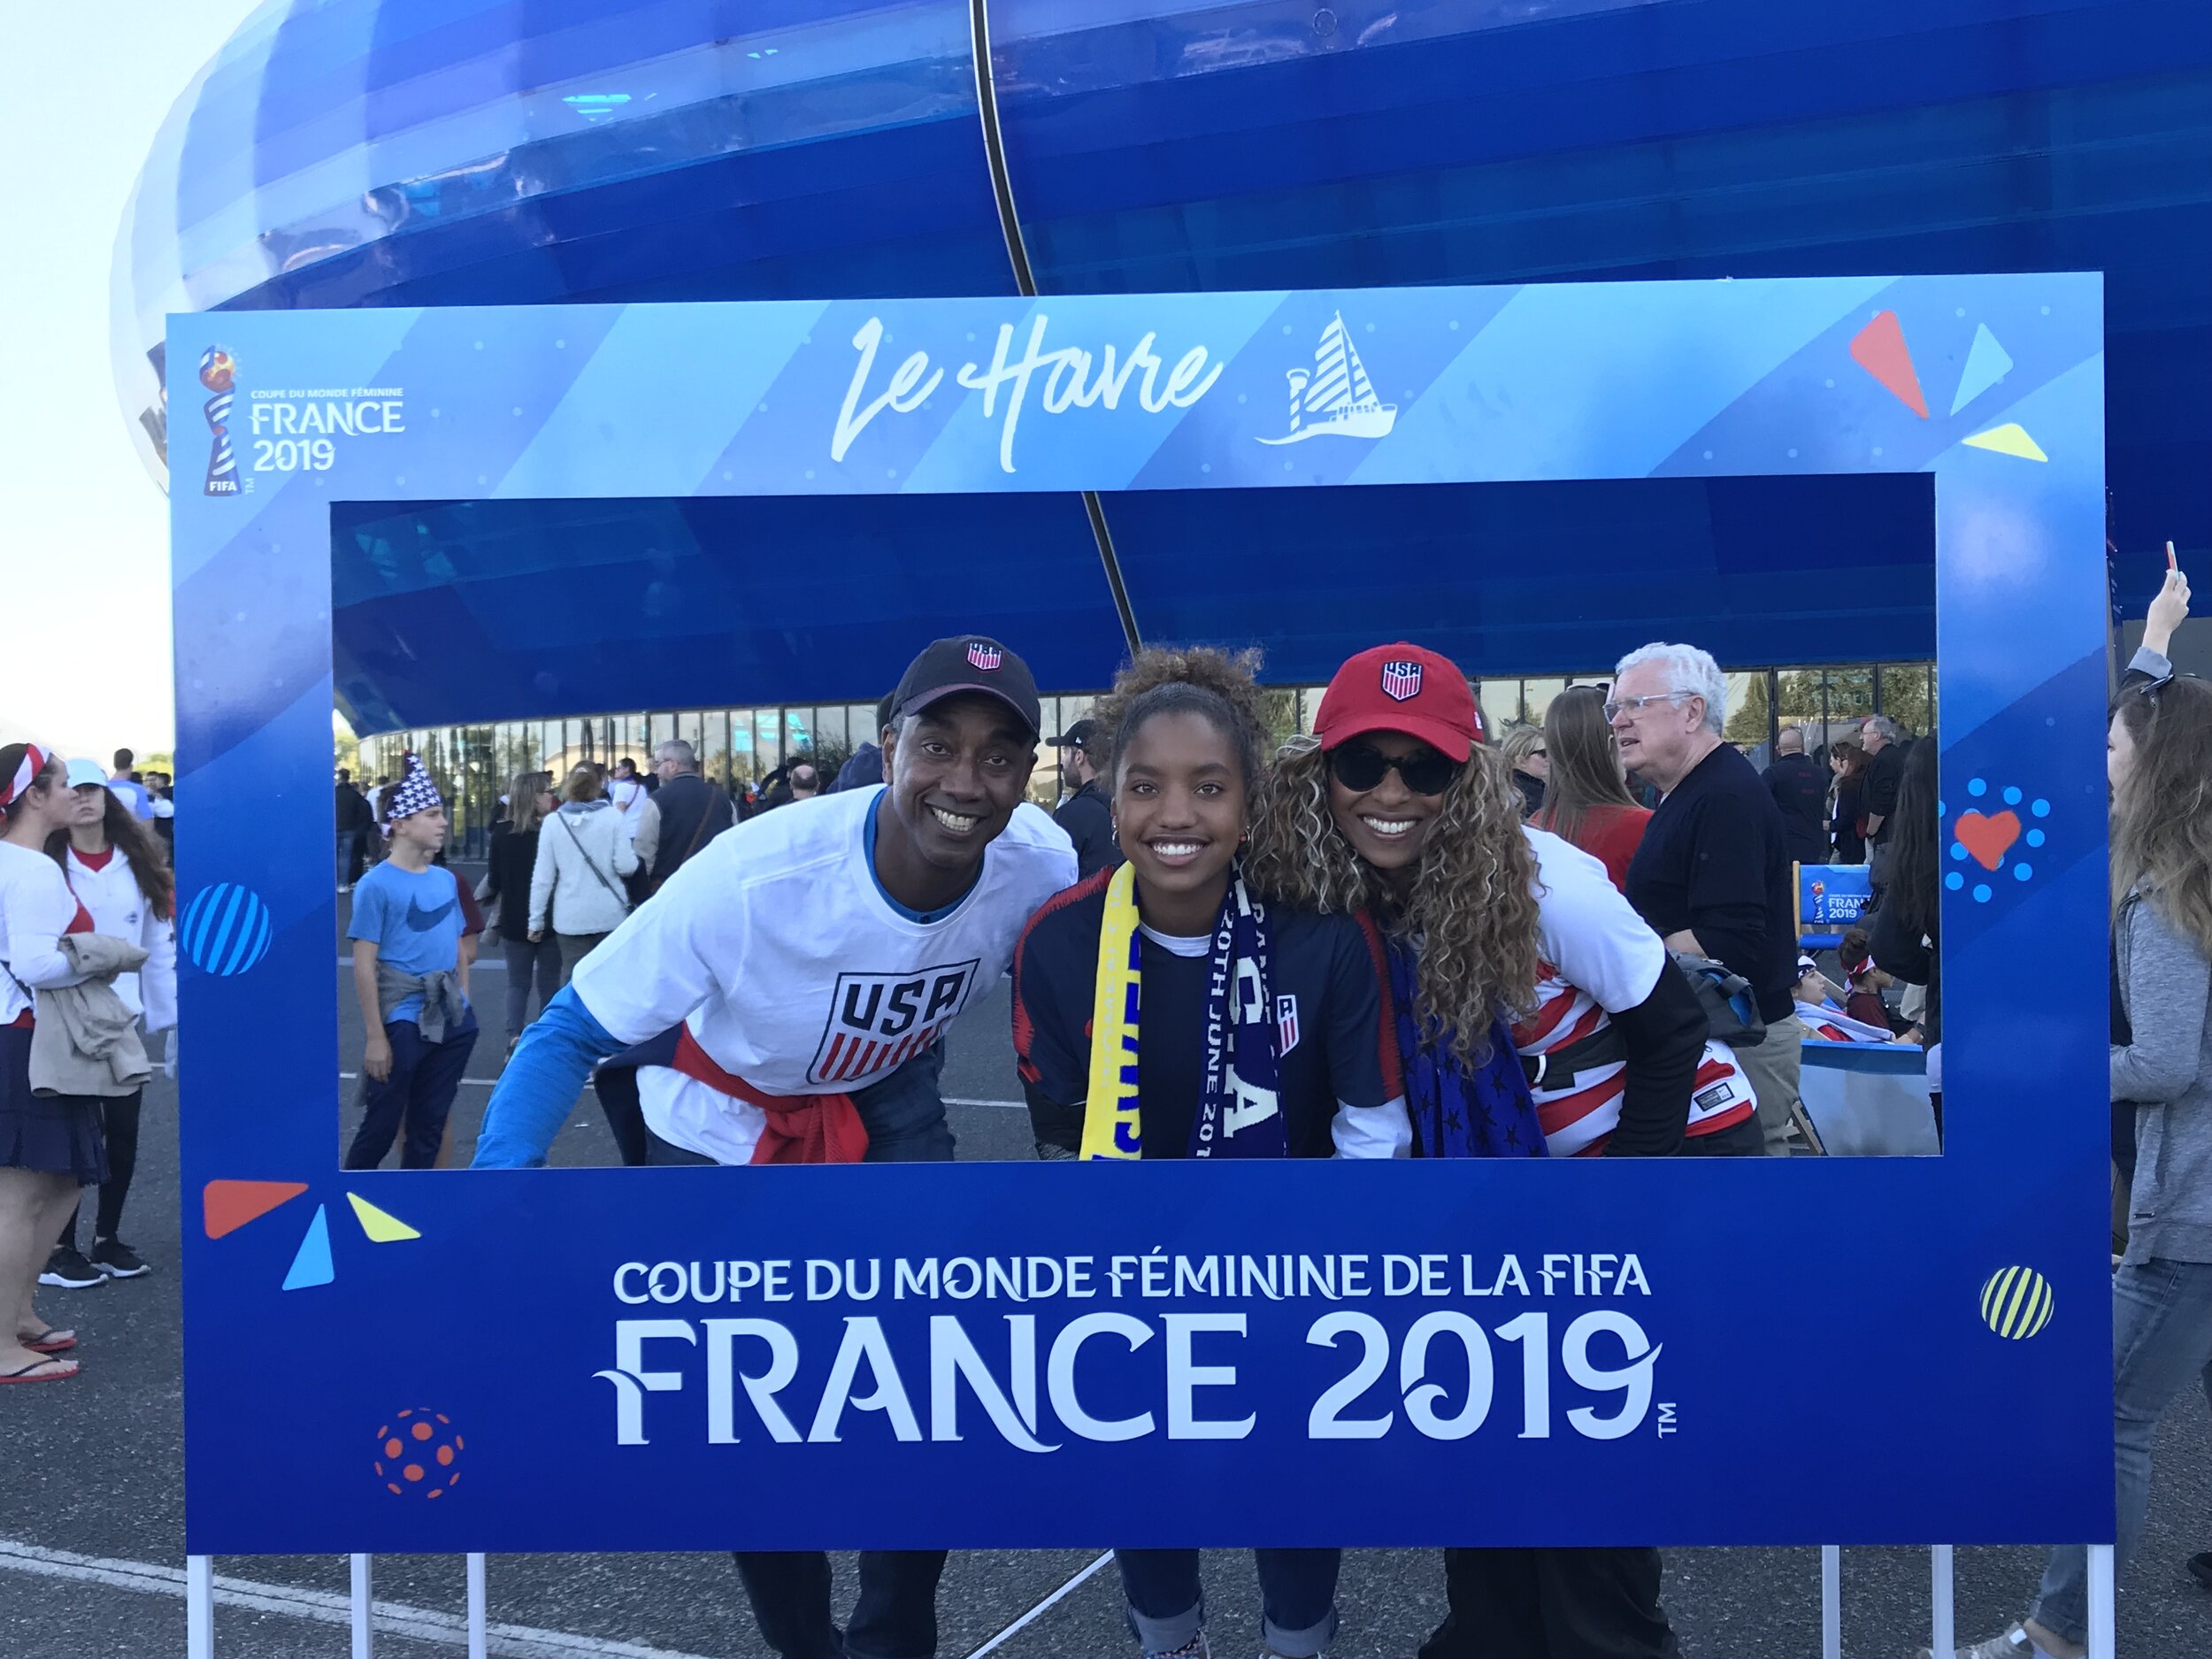 Michelle &amp; hubby with youngest daughter, Saige, a soccer player at 2019 Women’s World Cup in Le Havre, France. 